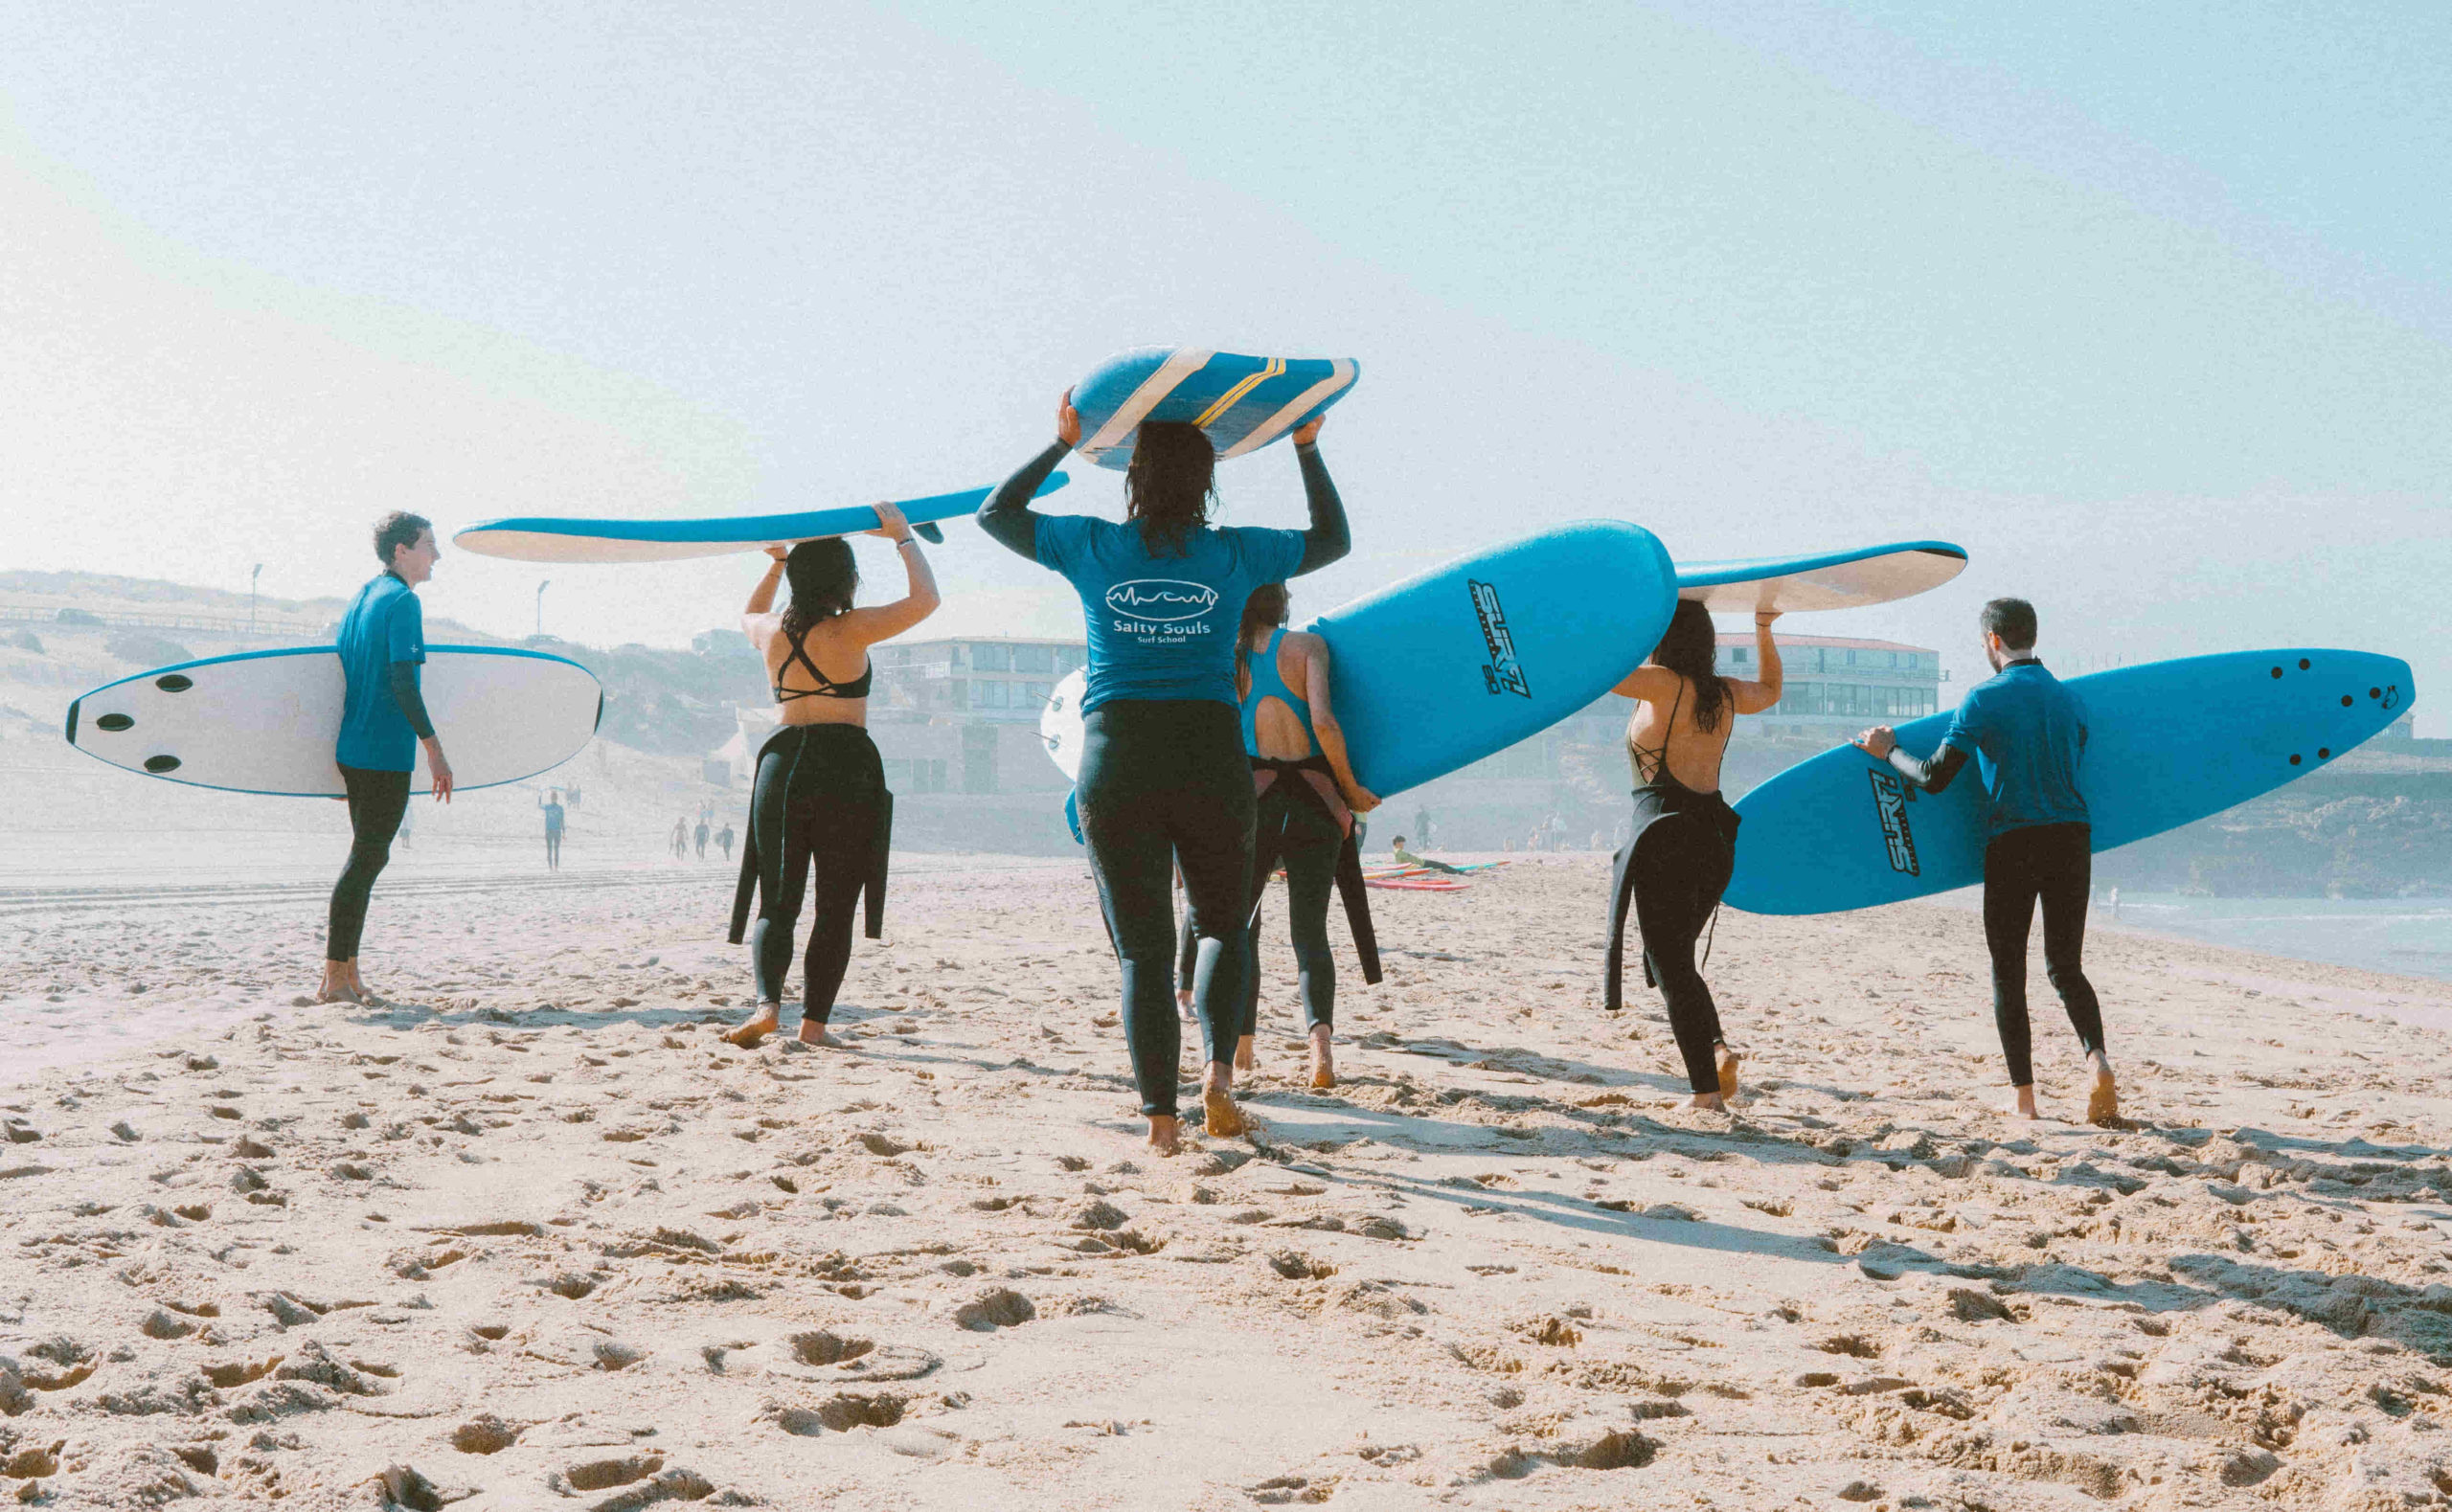 Group going to surf with surfboards on their heads.